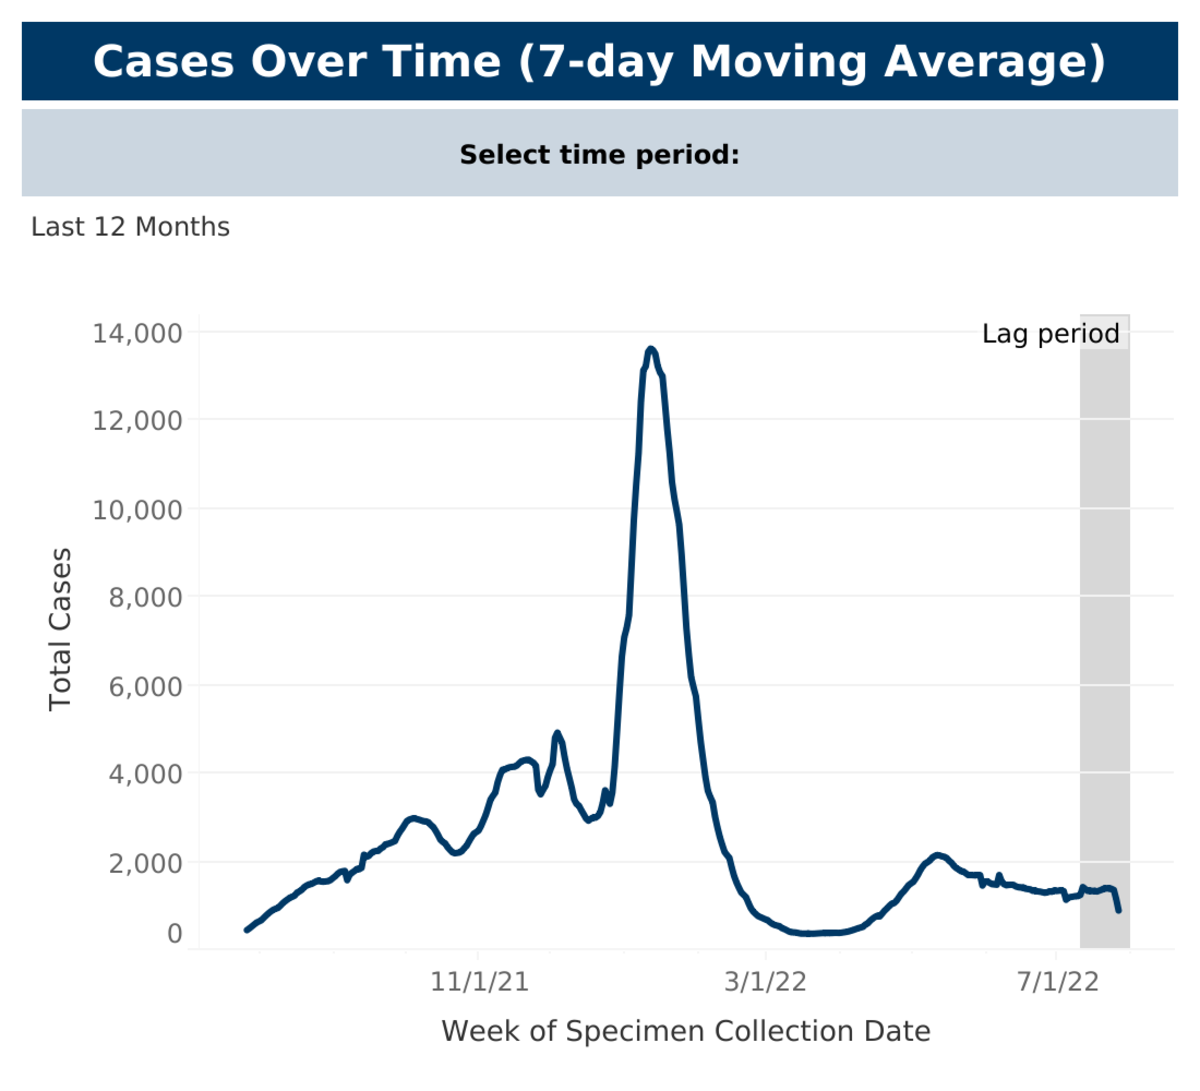 Case 7-day Moving Average Dashboard (1)